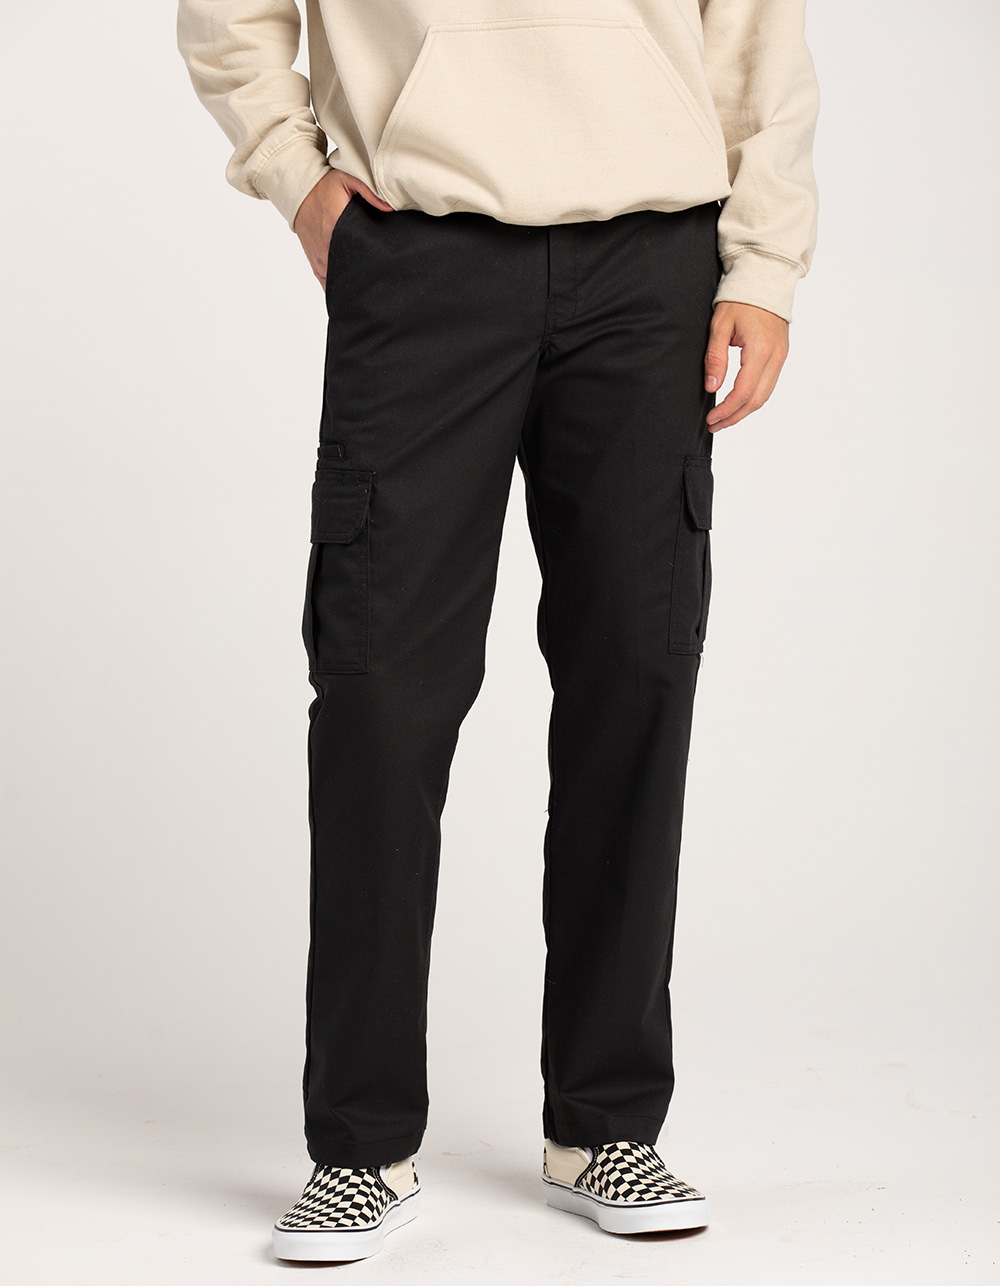 Dickies Twill Cargo Pant  Pants outfit men Dickies cargo pants Cargo  pants outfit men